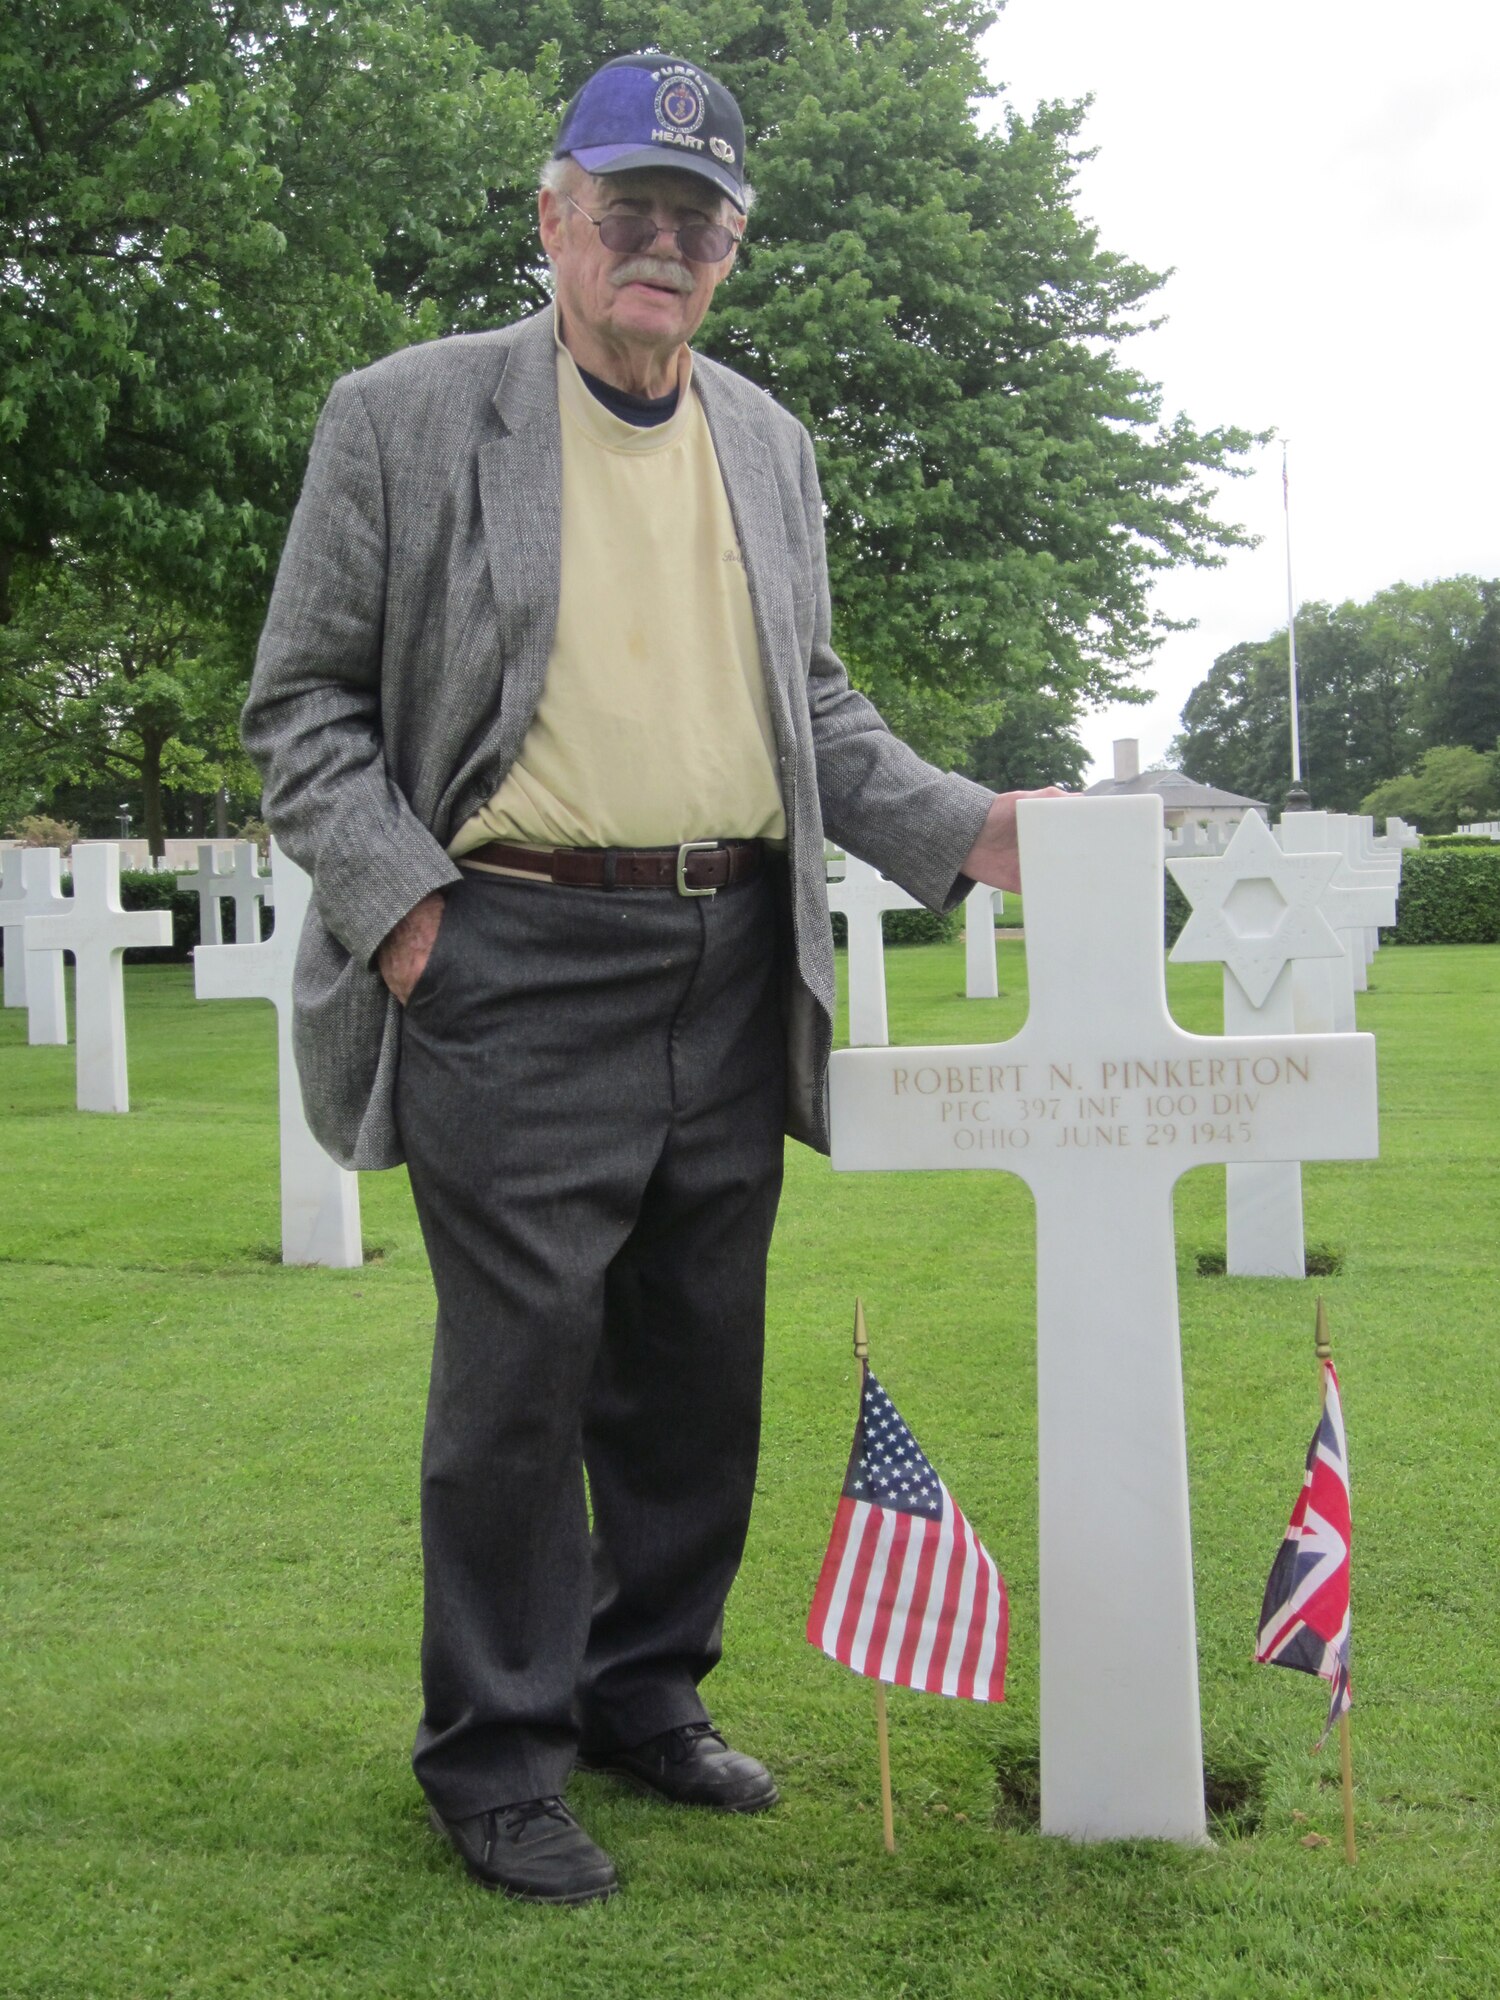 CAMBRIDGE AMERICAN CEMETERY, England - James Pinkerton, 87-year-old Purple Heart veteran of World War II, stands by his brother’s grave at Cambridge American Cemetery, May 19, 2011. Pinkerton visited his brother’s headstone to say a long-awaited ‘hello,’ and final ‘good bye.’ (Courtesy photo)